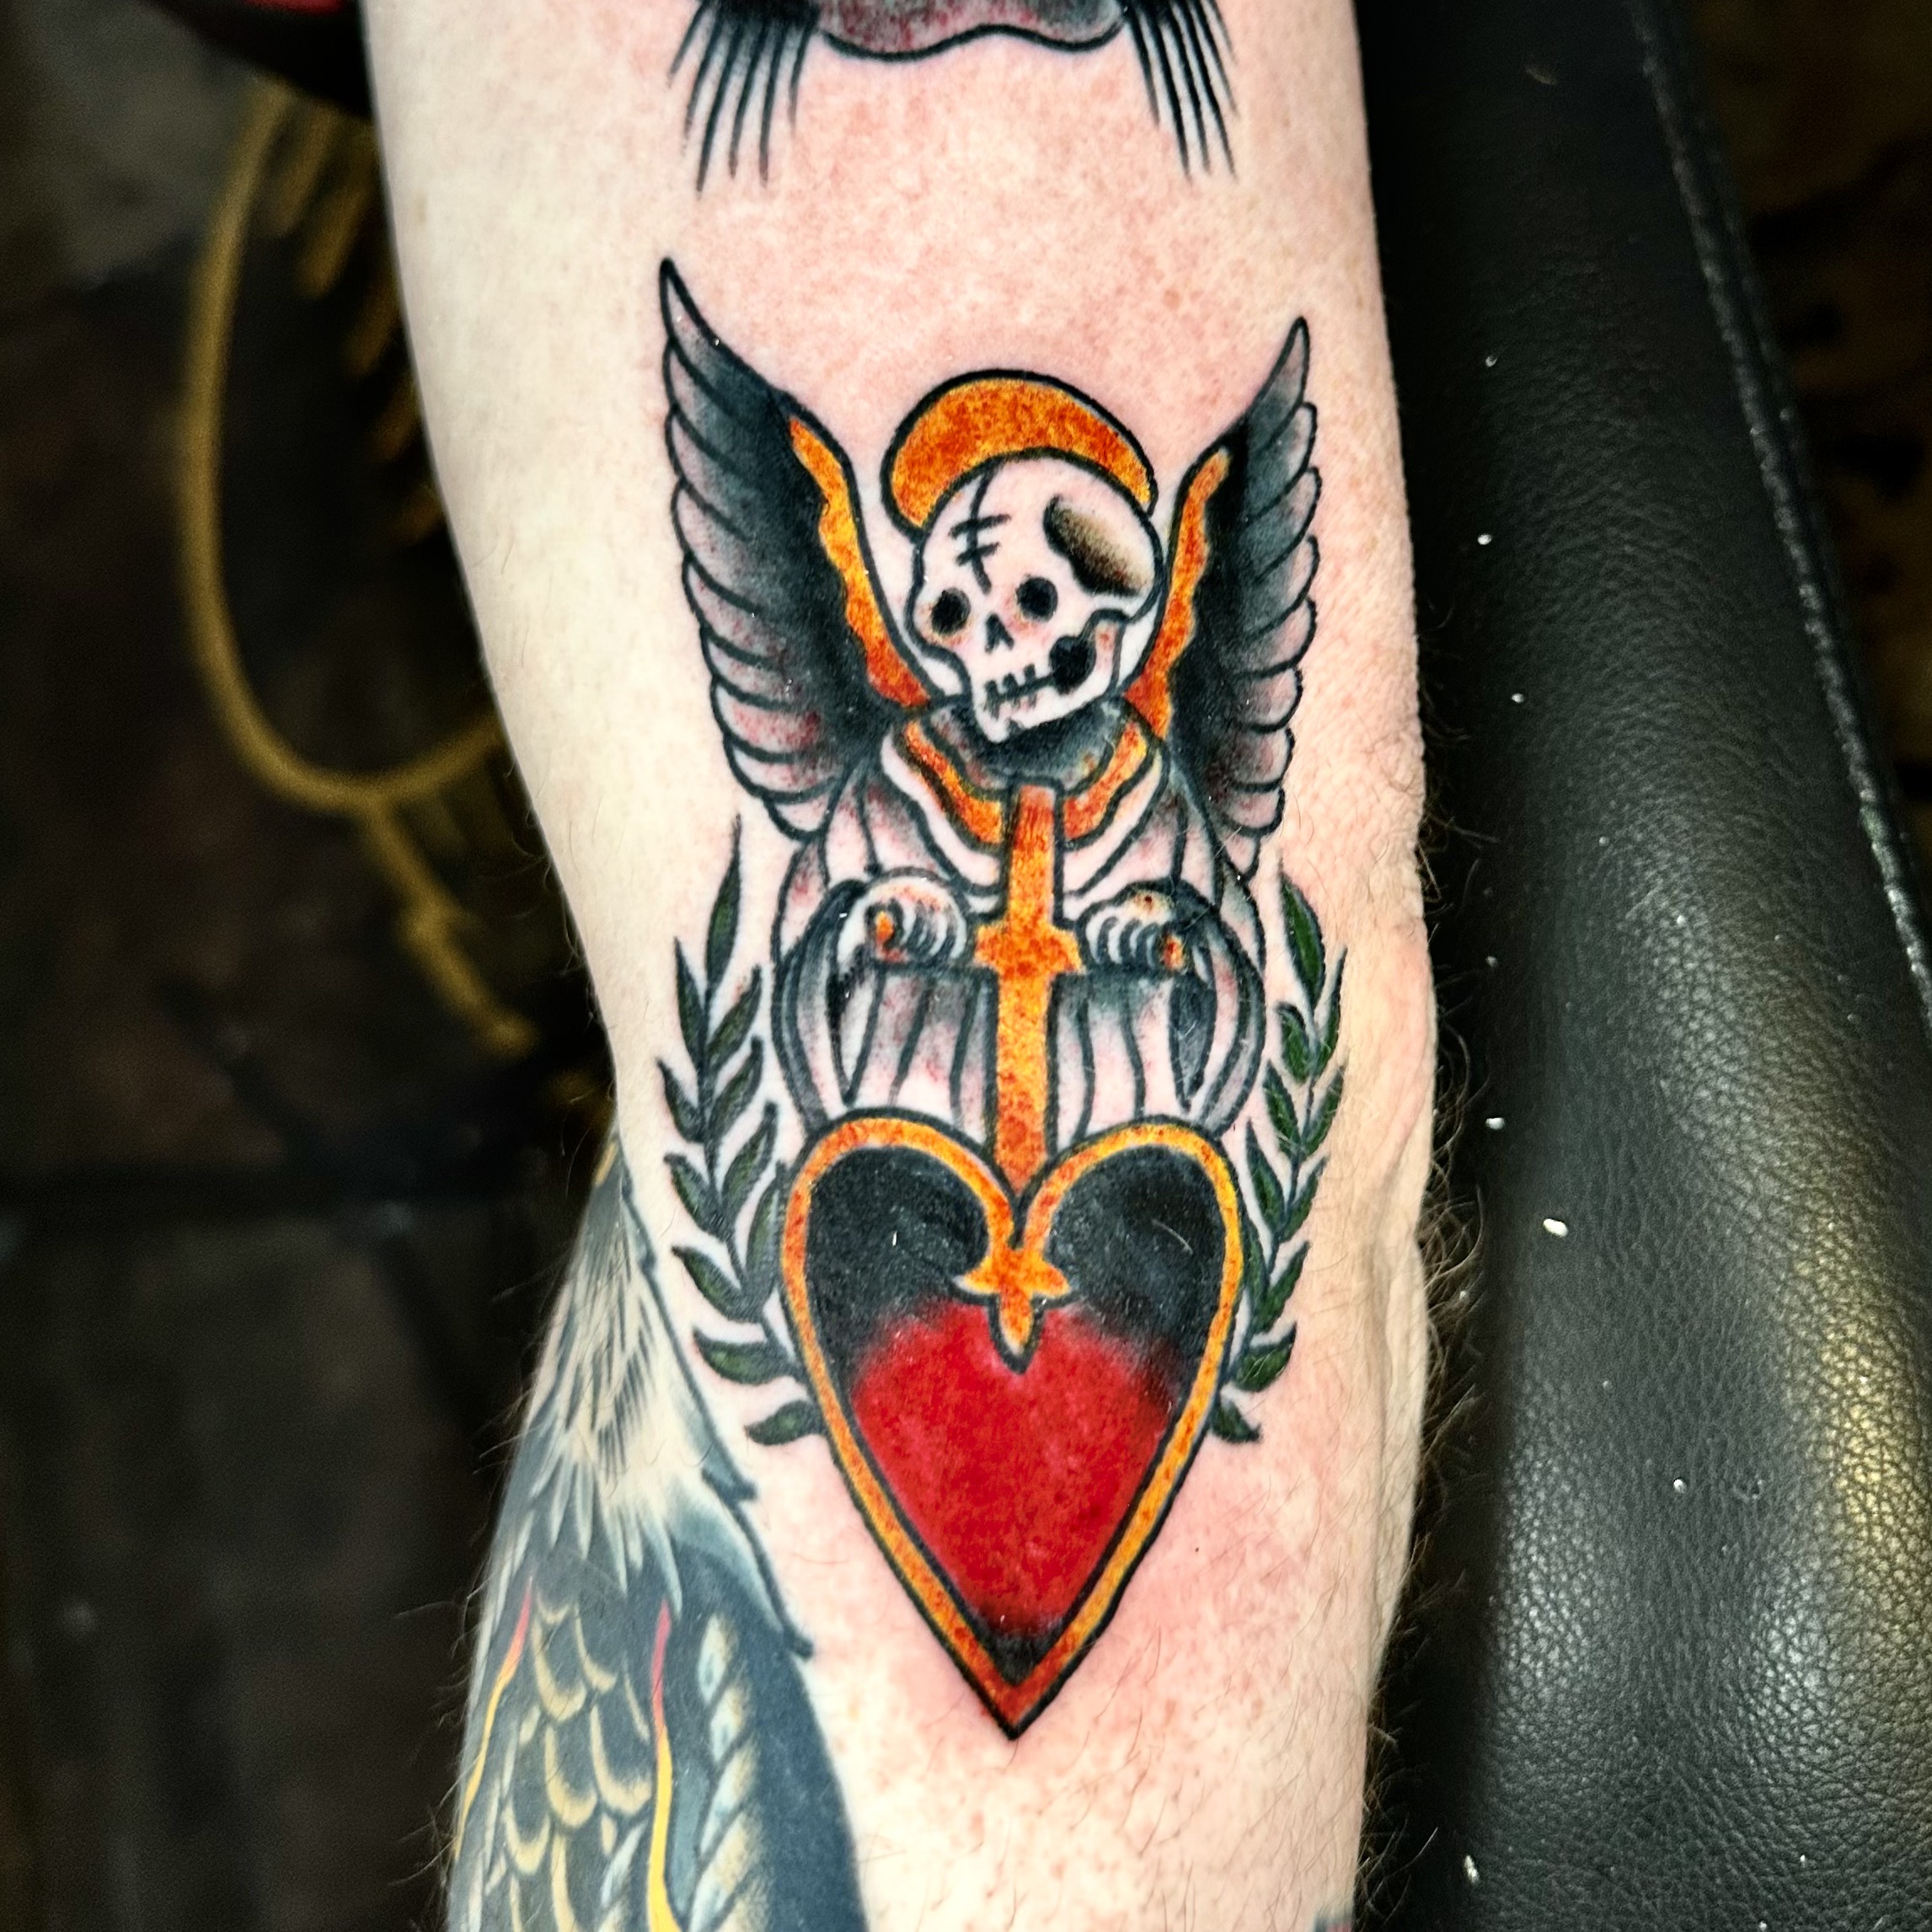 tattoo of a skull, with wings and a heart